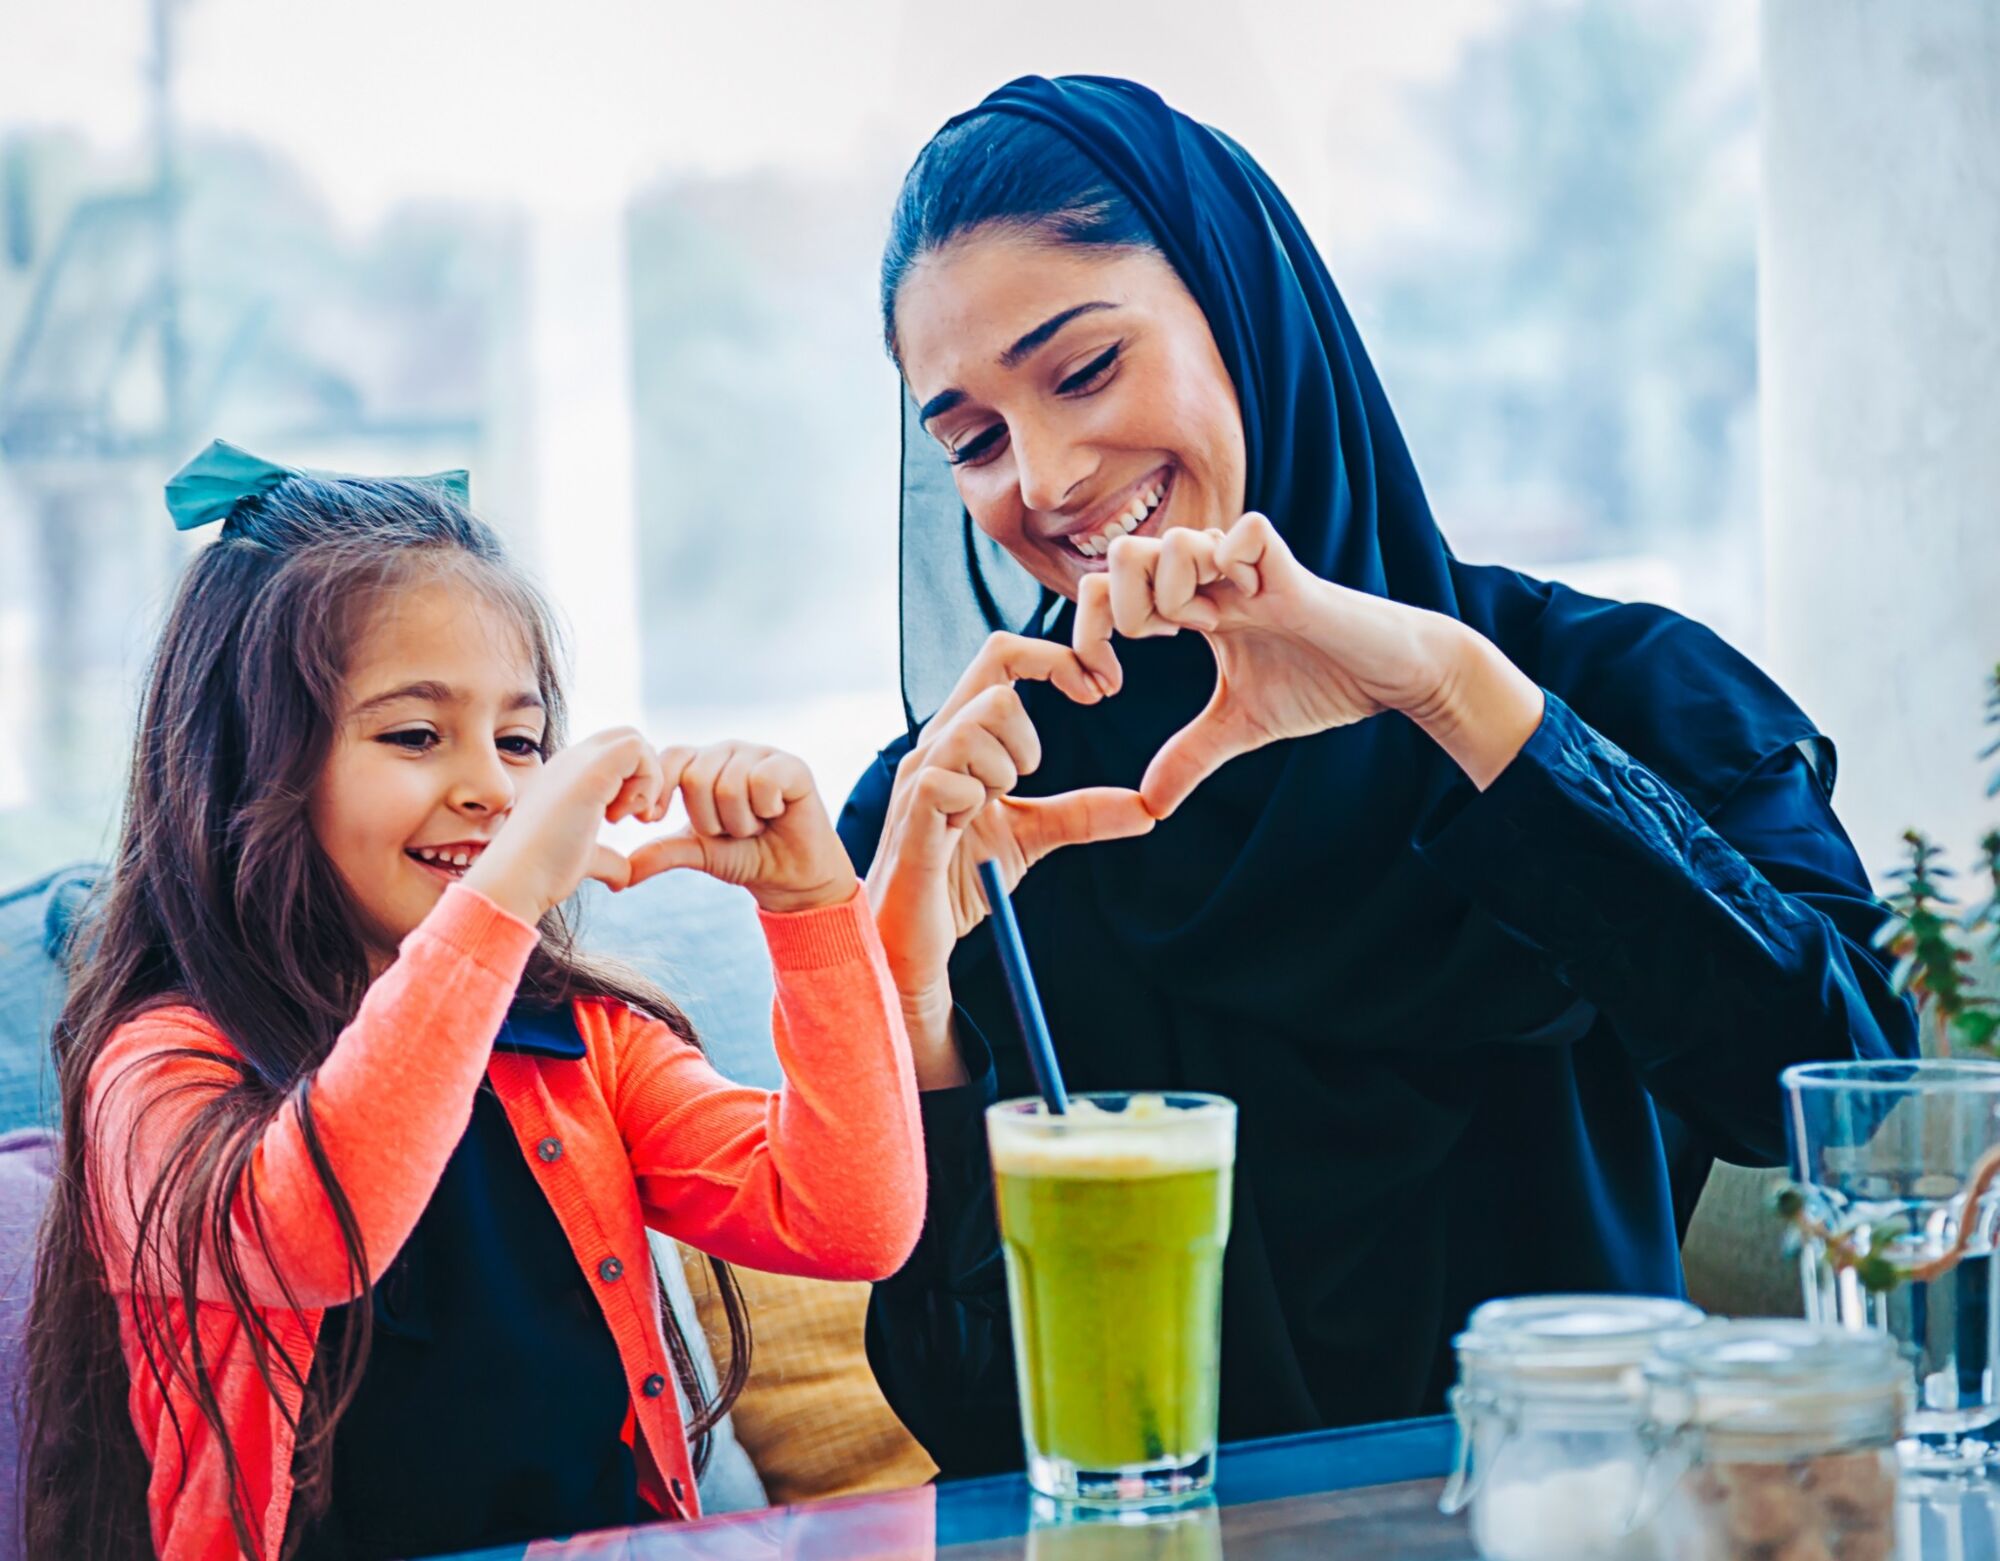 A mother and young daughter make hearts with their hands while a green juice is on the table in front of them.